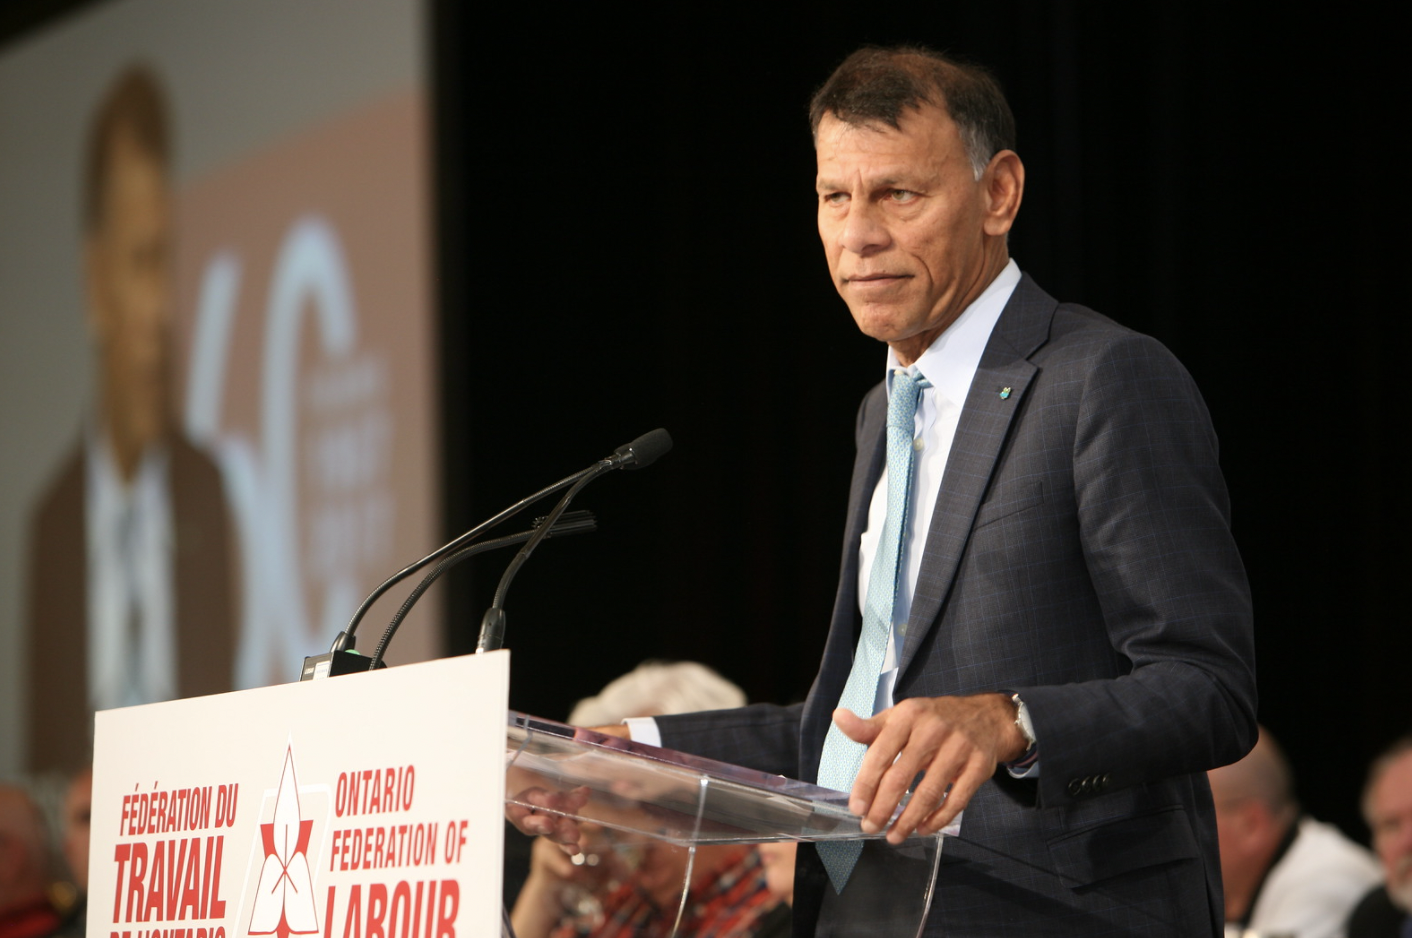 Hassan Yussuff Showed That Access To Power Is Not Actual Power